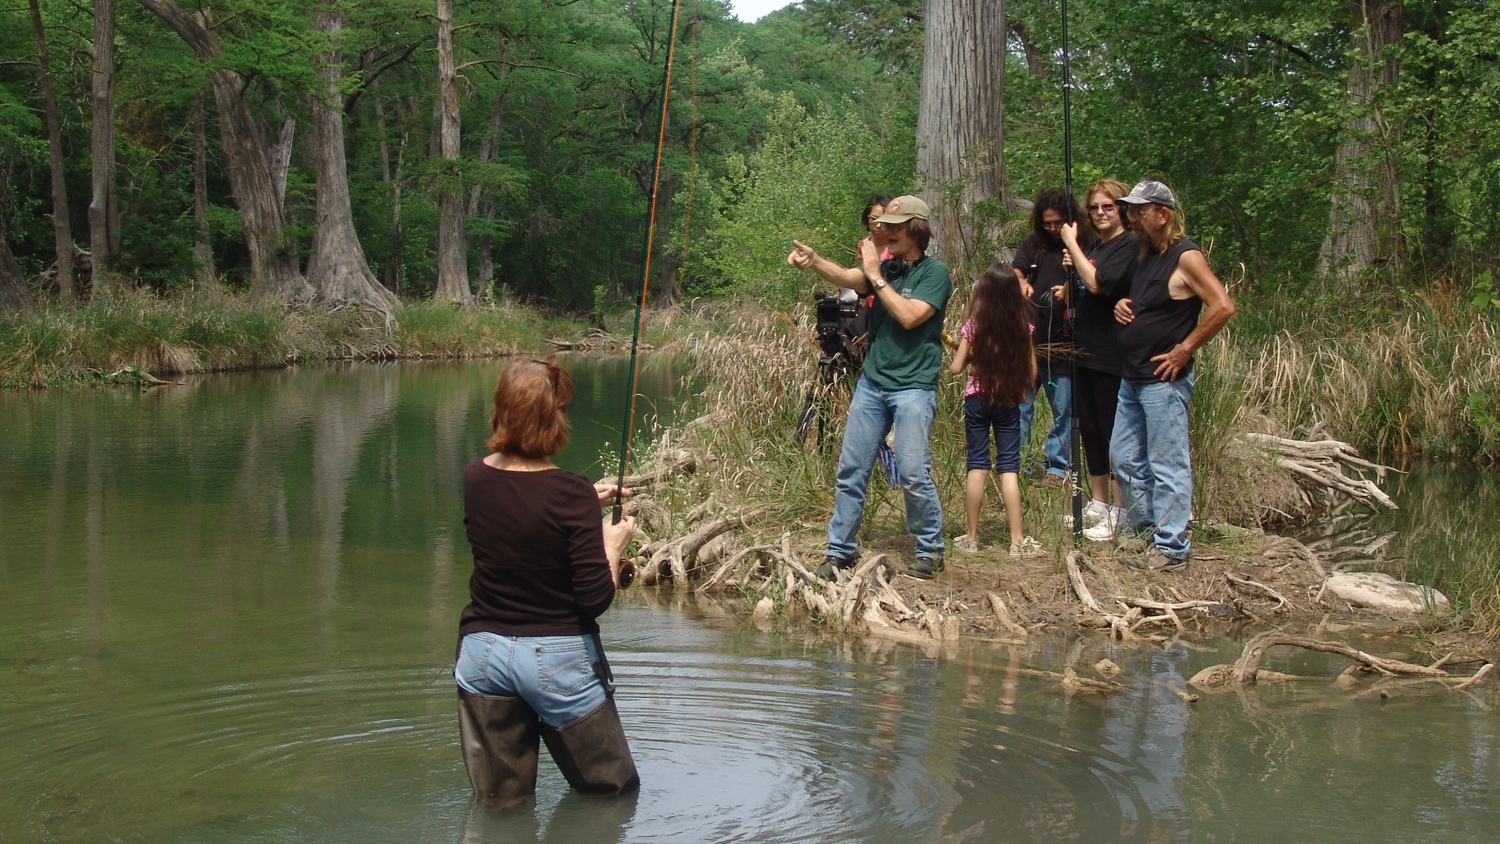 crew filming on the Blanco River. The director, Rodger Marion, is in the green shirt.